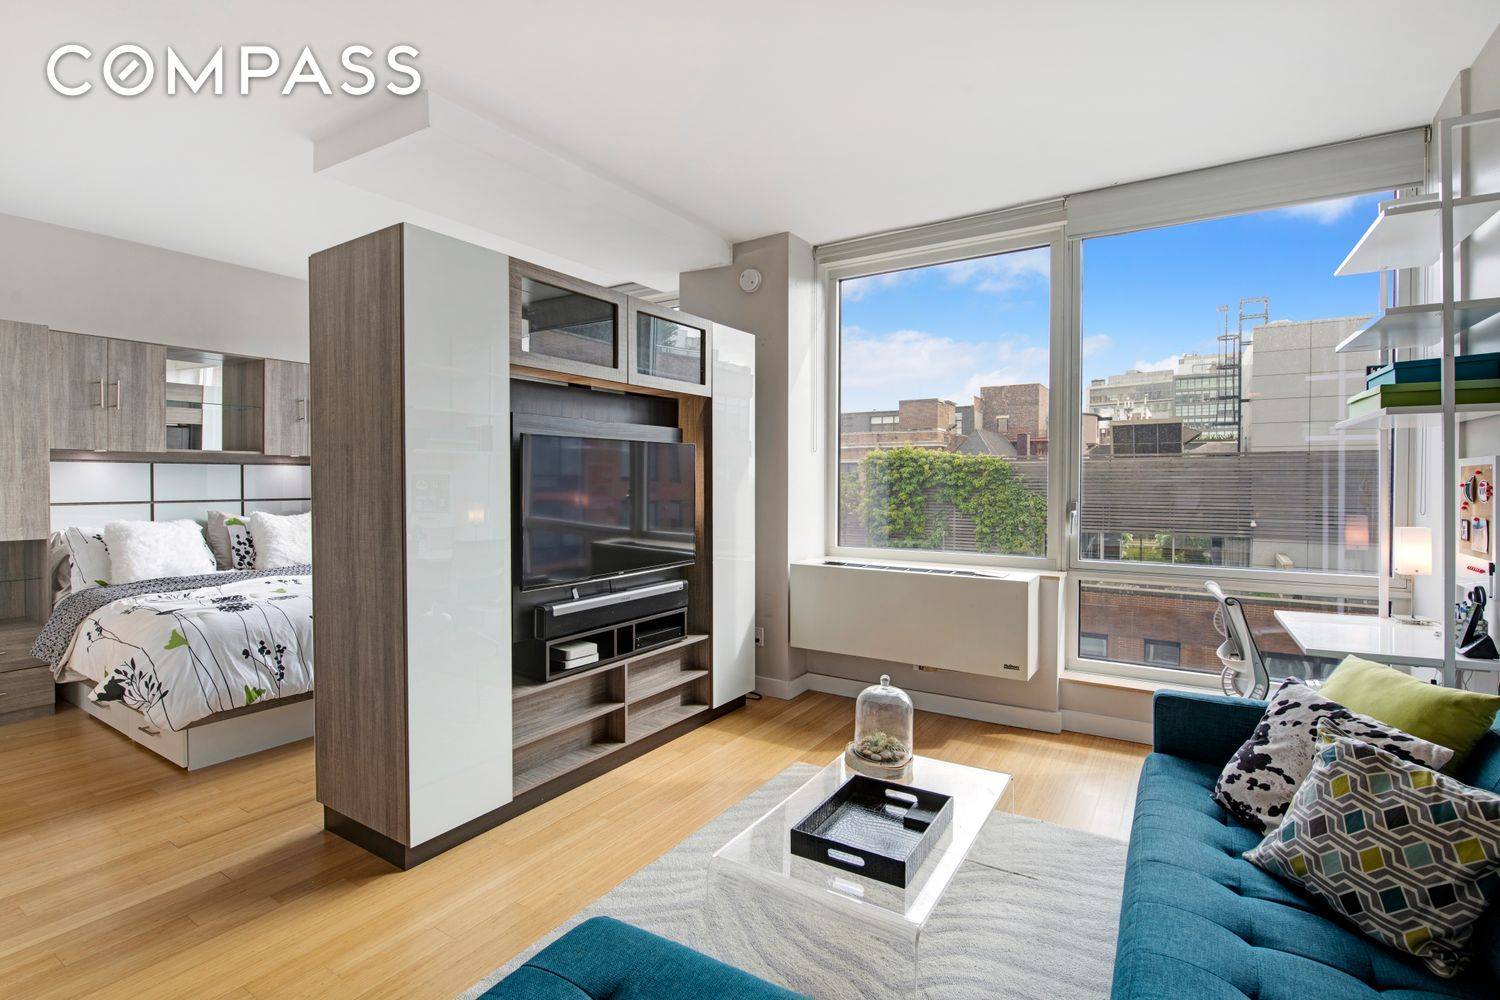 FULLY FURNISHED Located at The Caledonia, this south facing alcove studio is a perfect way to live into one of the city's most rapidly evolving and buzzing neighborhoods.